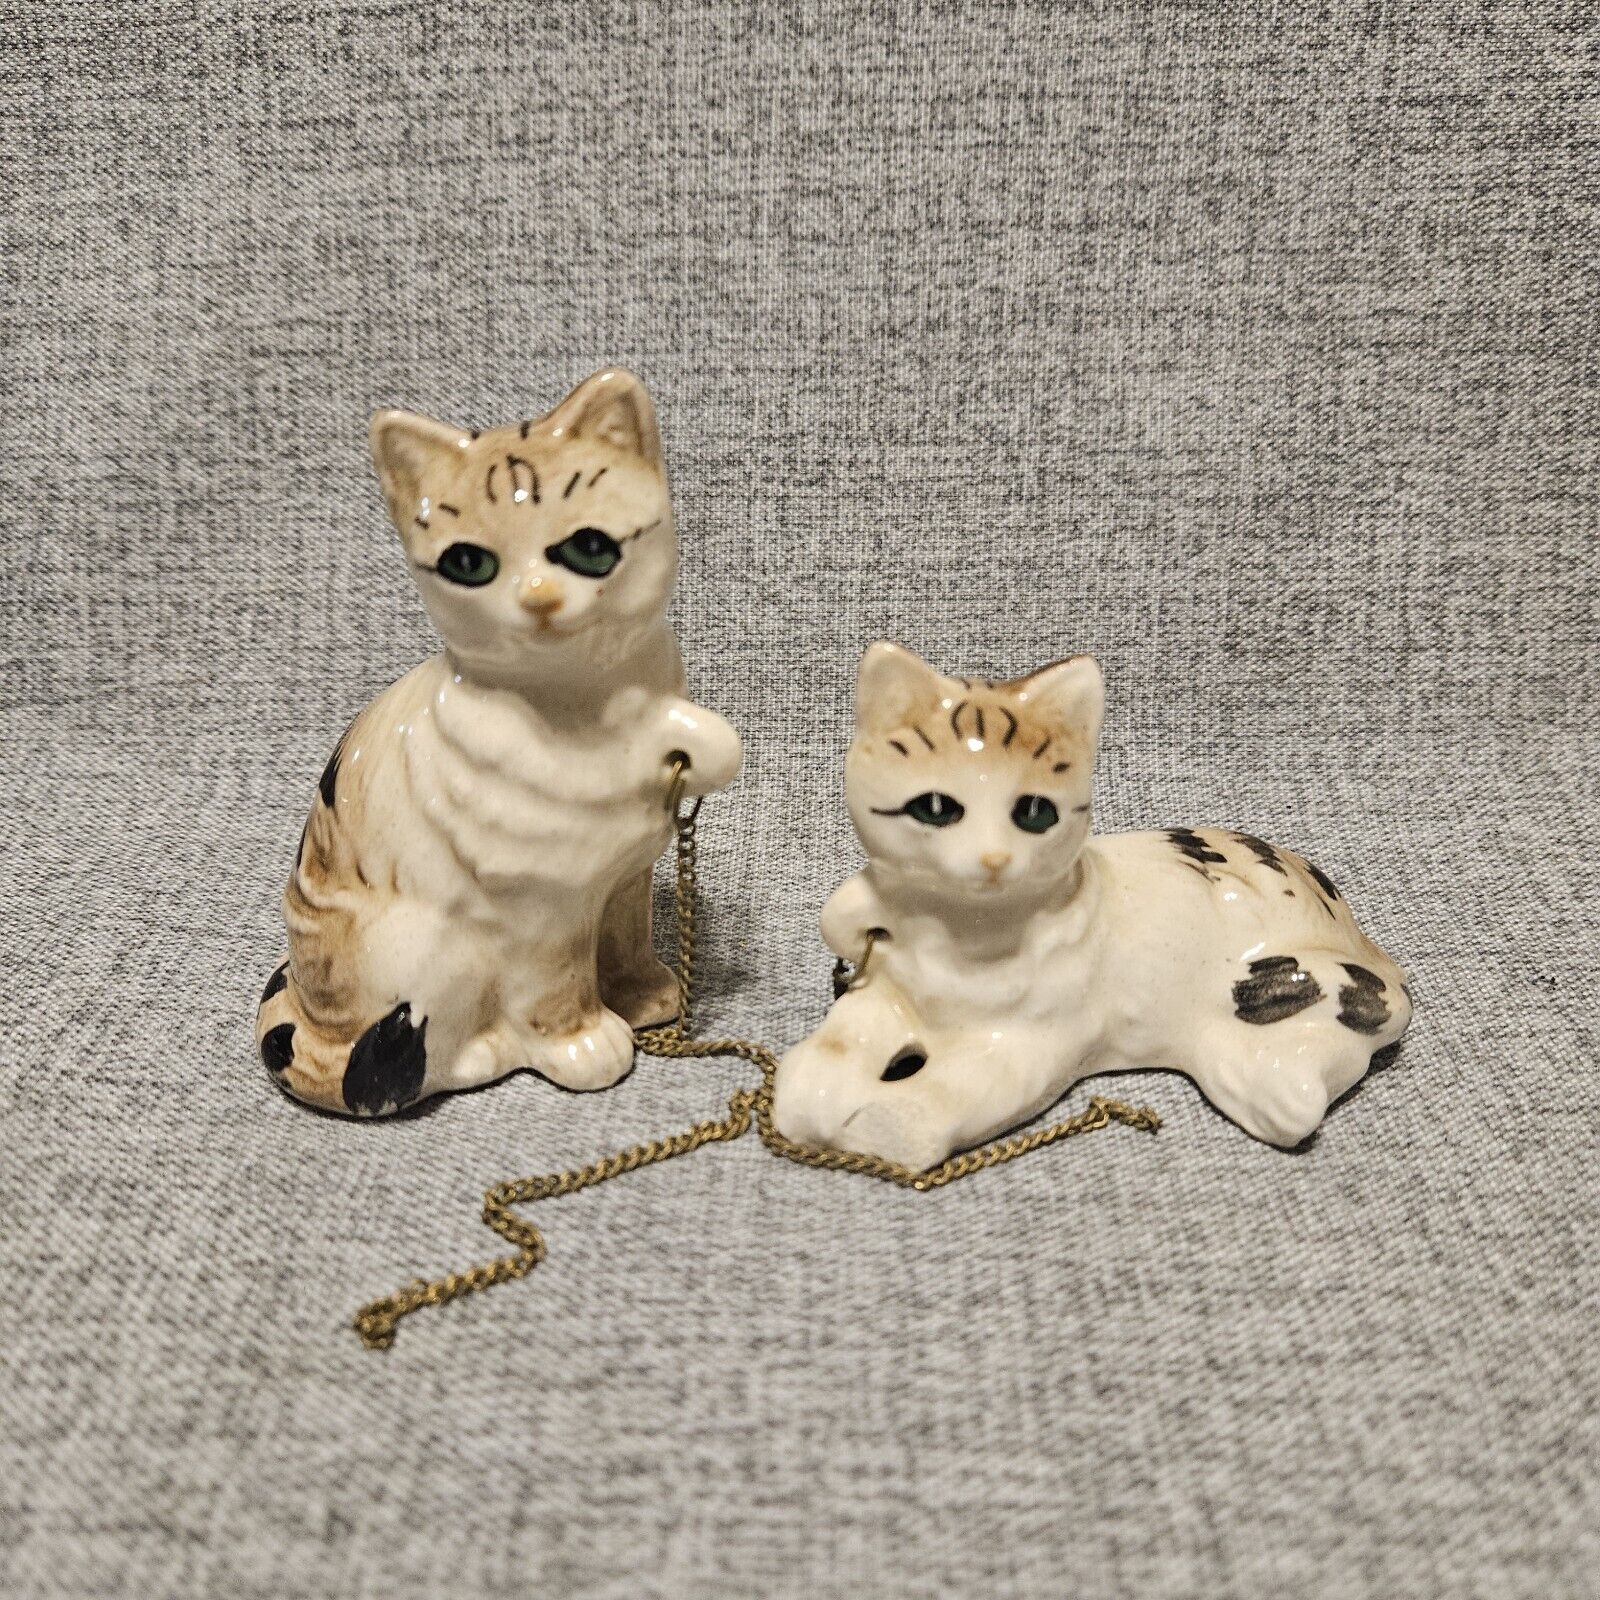 Vintage Japan ceramic Cat Pet Mid century kittens figurines With chains